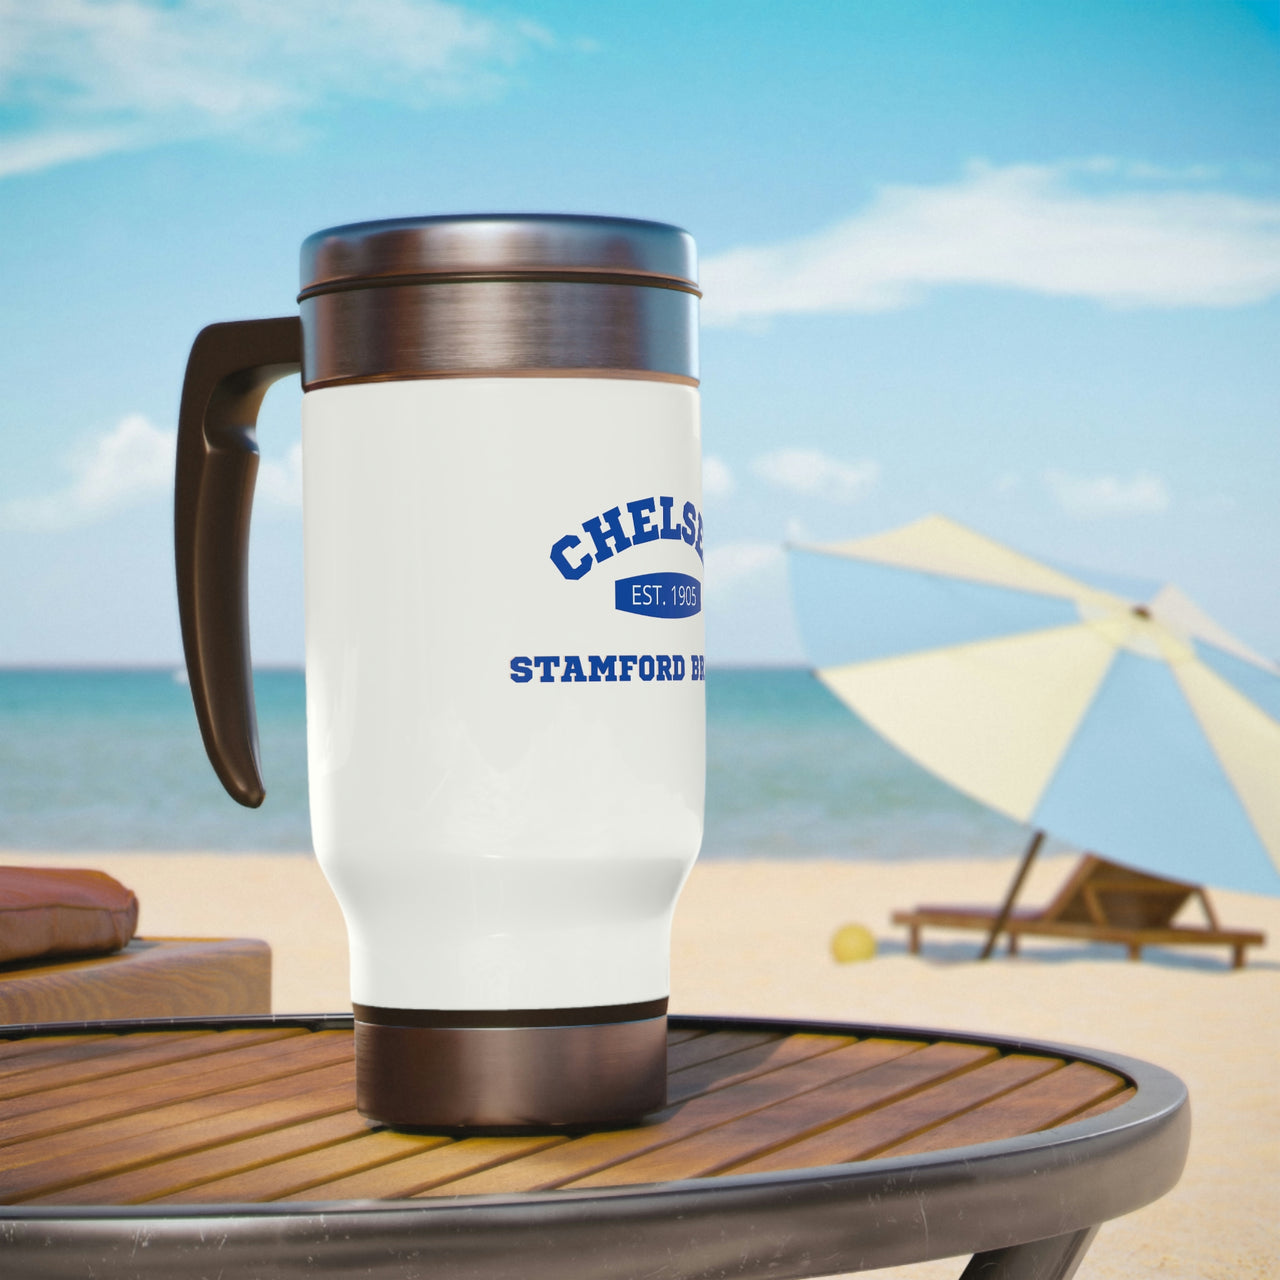 Chelsea Stainless Steel Travel Mug with Handle, 14oz